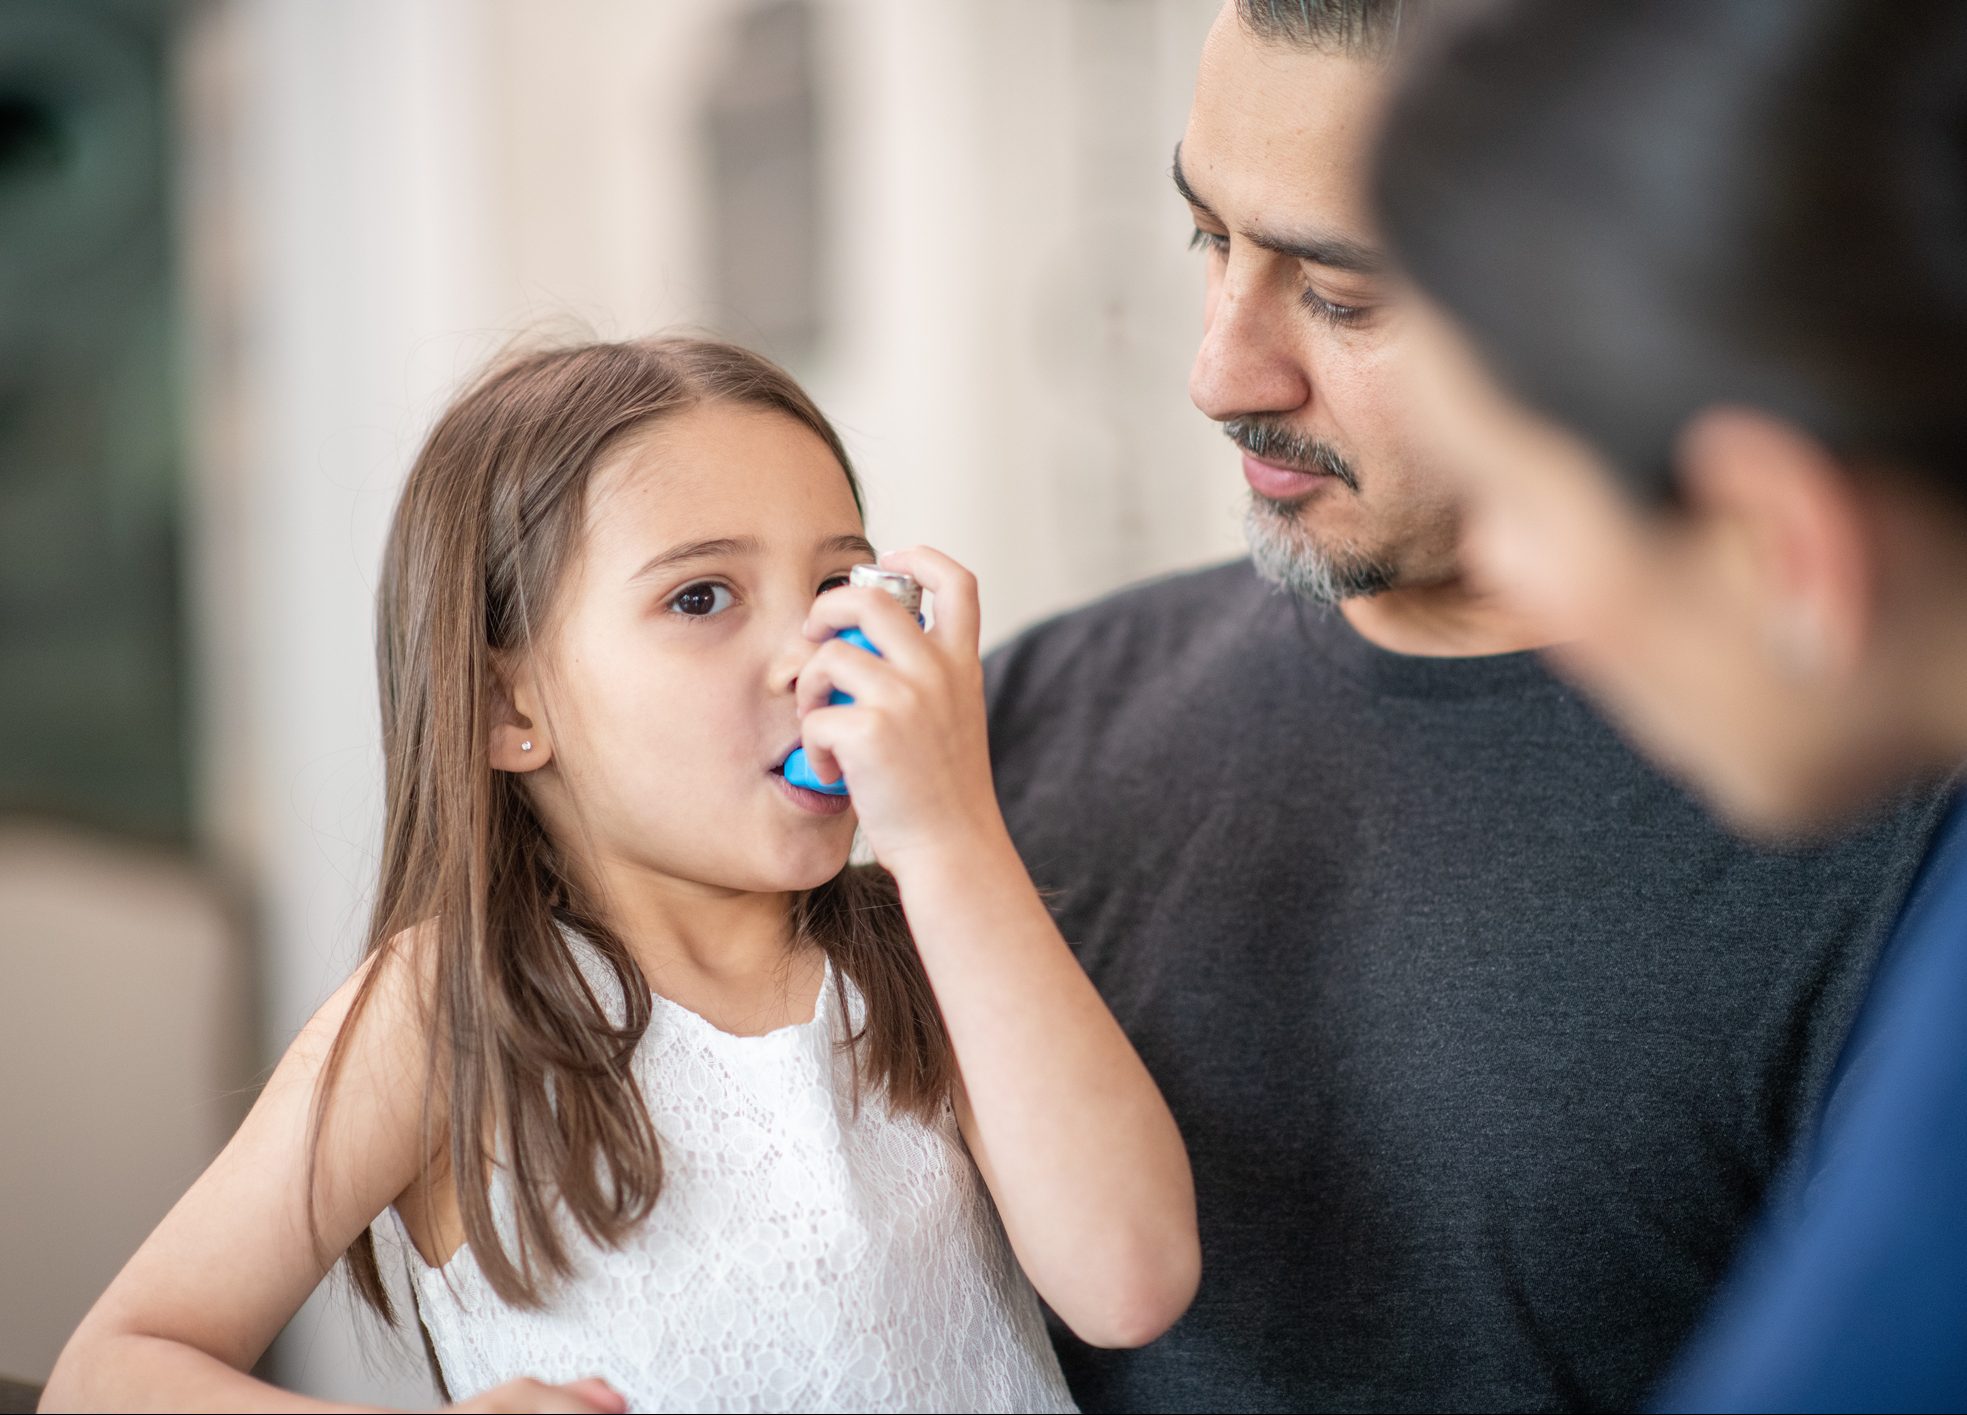 FUNIBER-preschool-age-girl-with-asthma-learns-to-use-an-inhaler